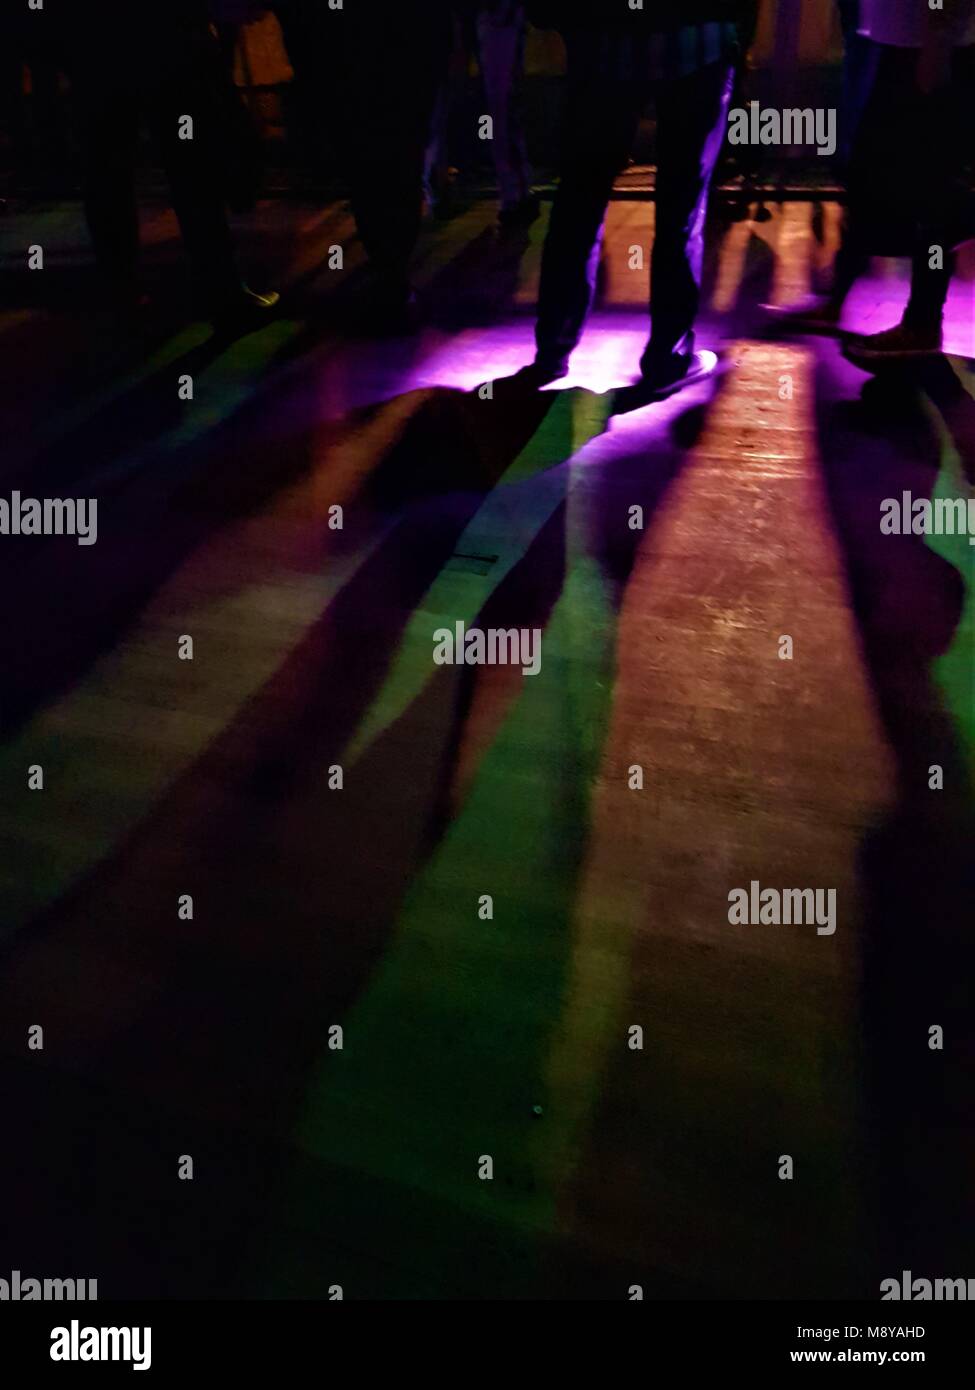 Low view of people standing watching a band at a gig with stage lights making silhouette patterns on wooden floor Stock Photo